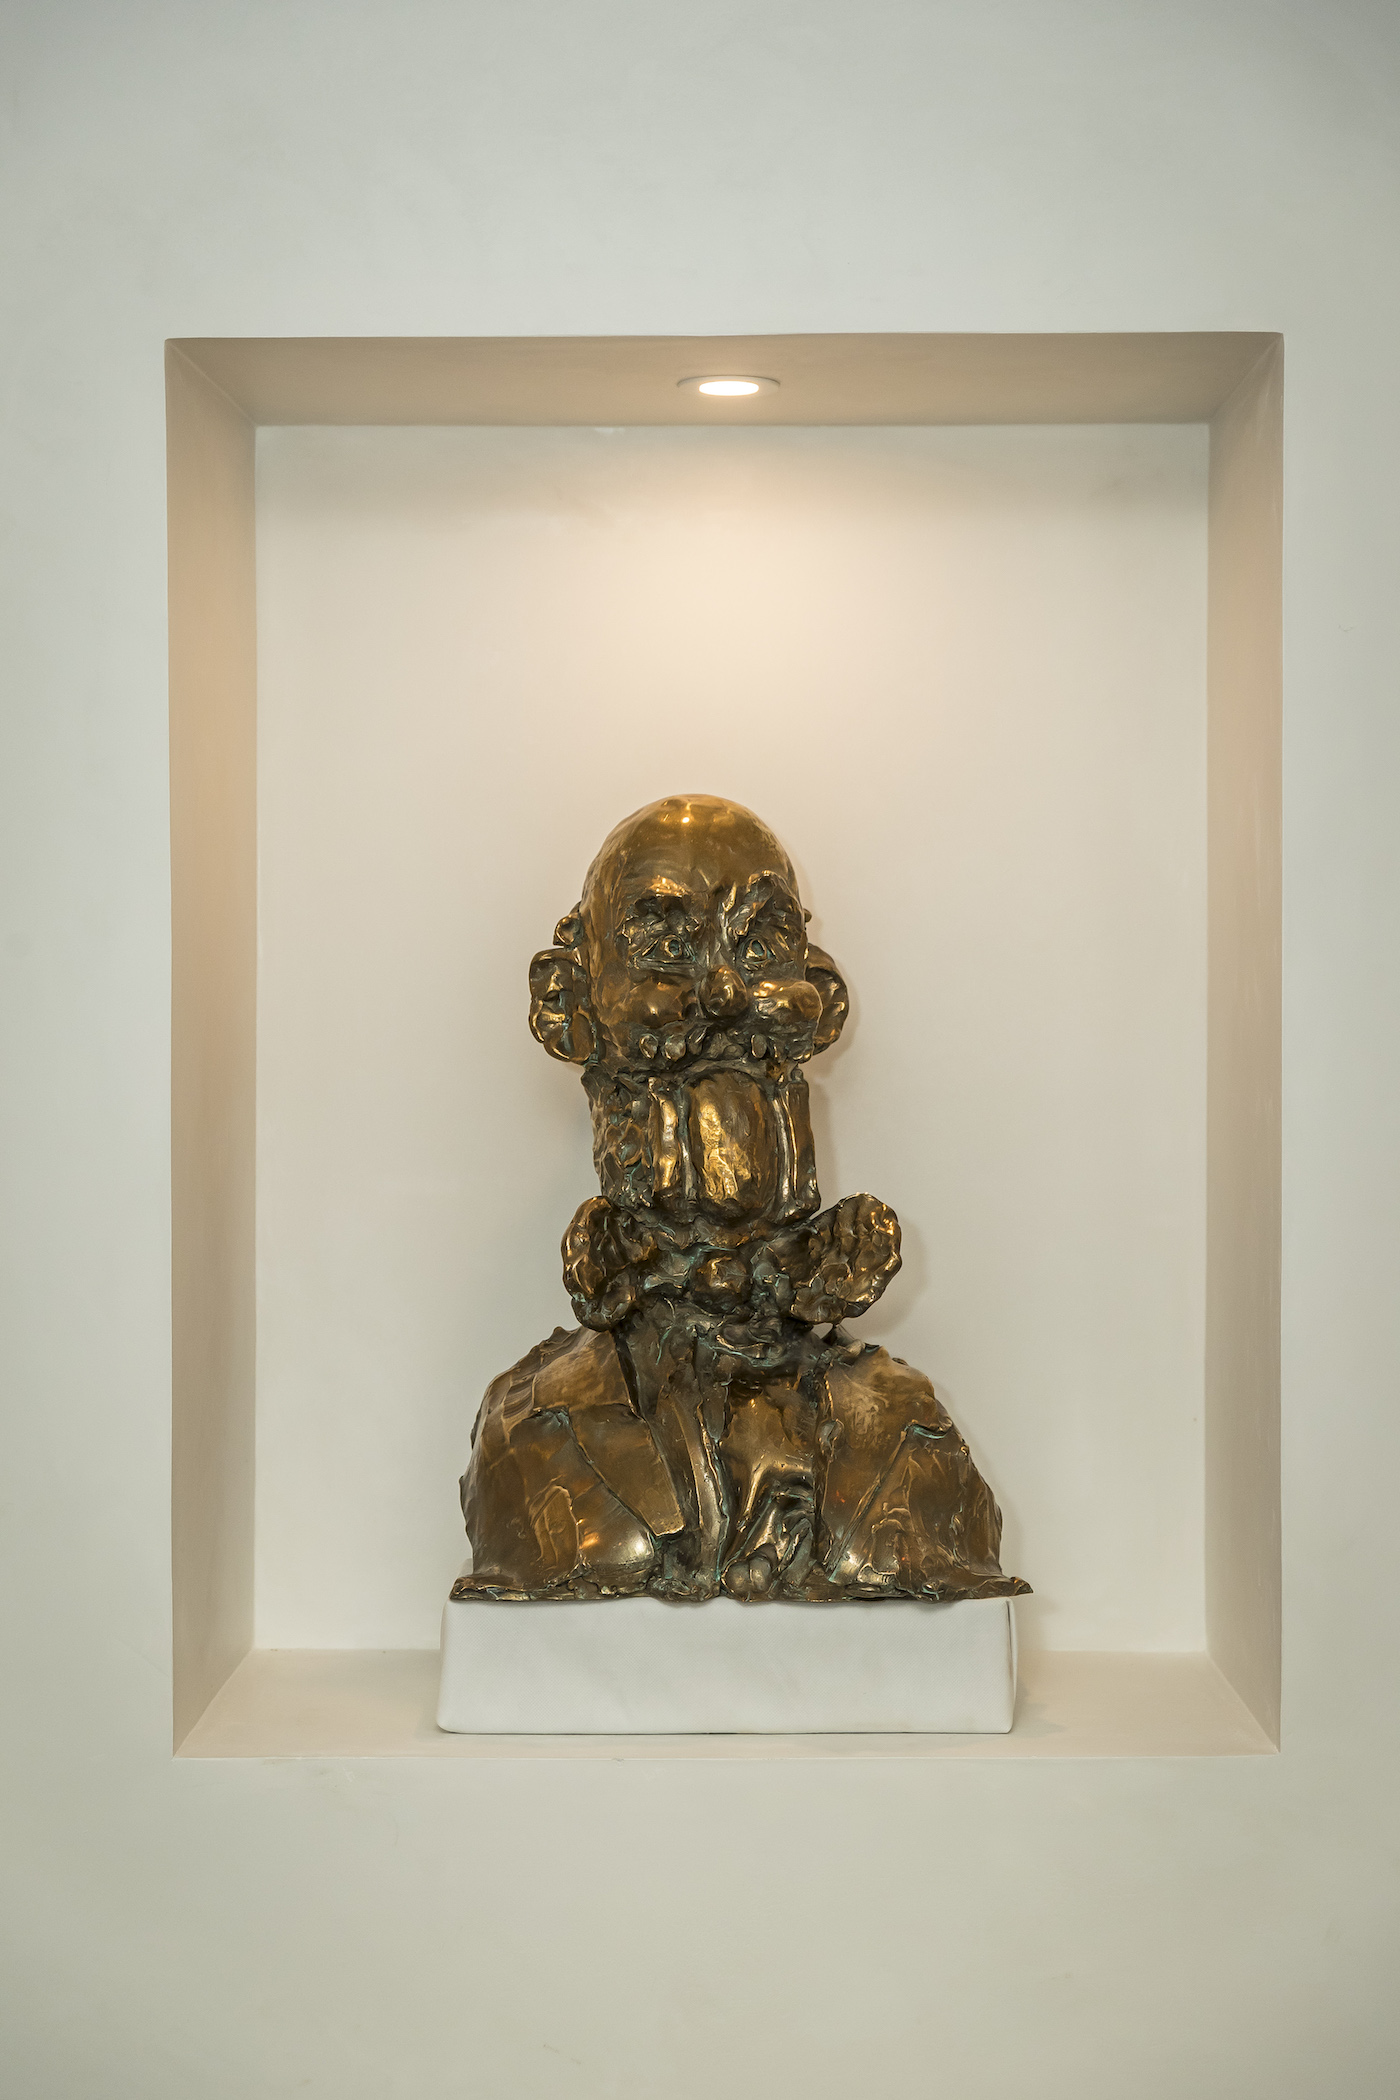 gold sculpture by george condo sits in wall nook in jamie tisch home